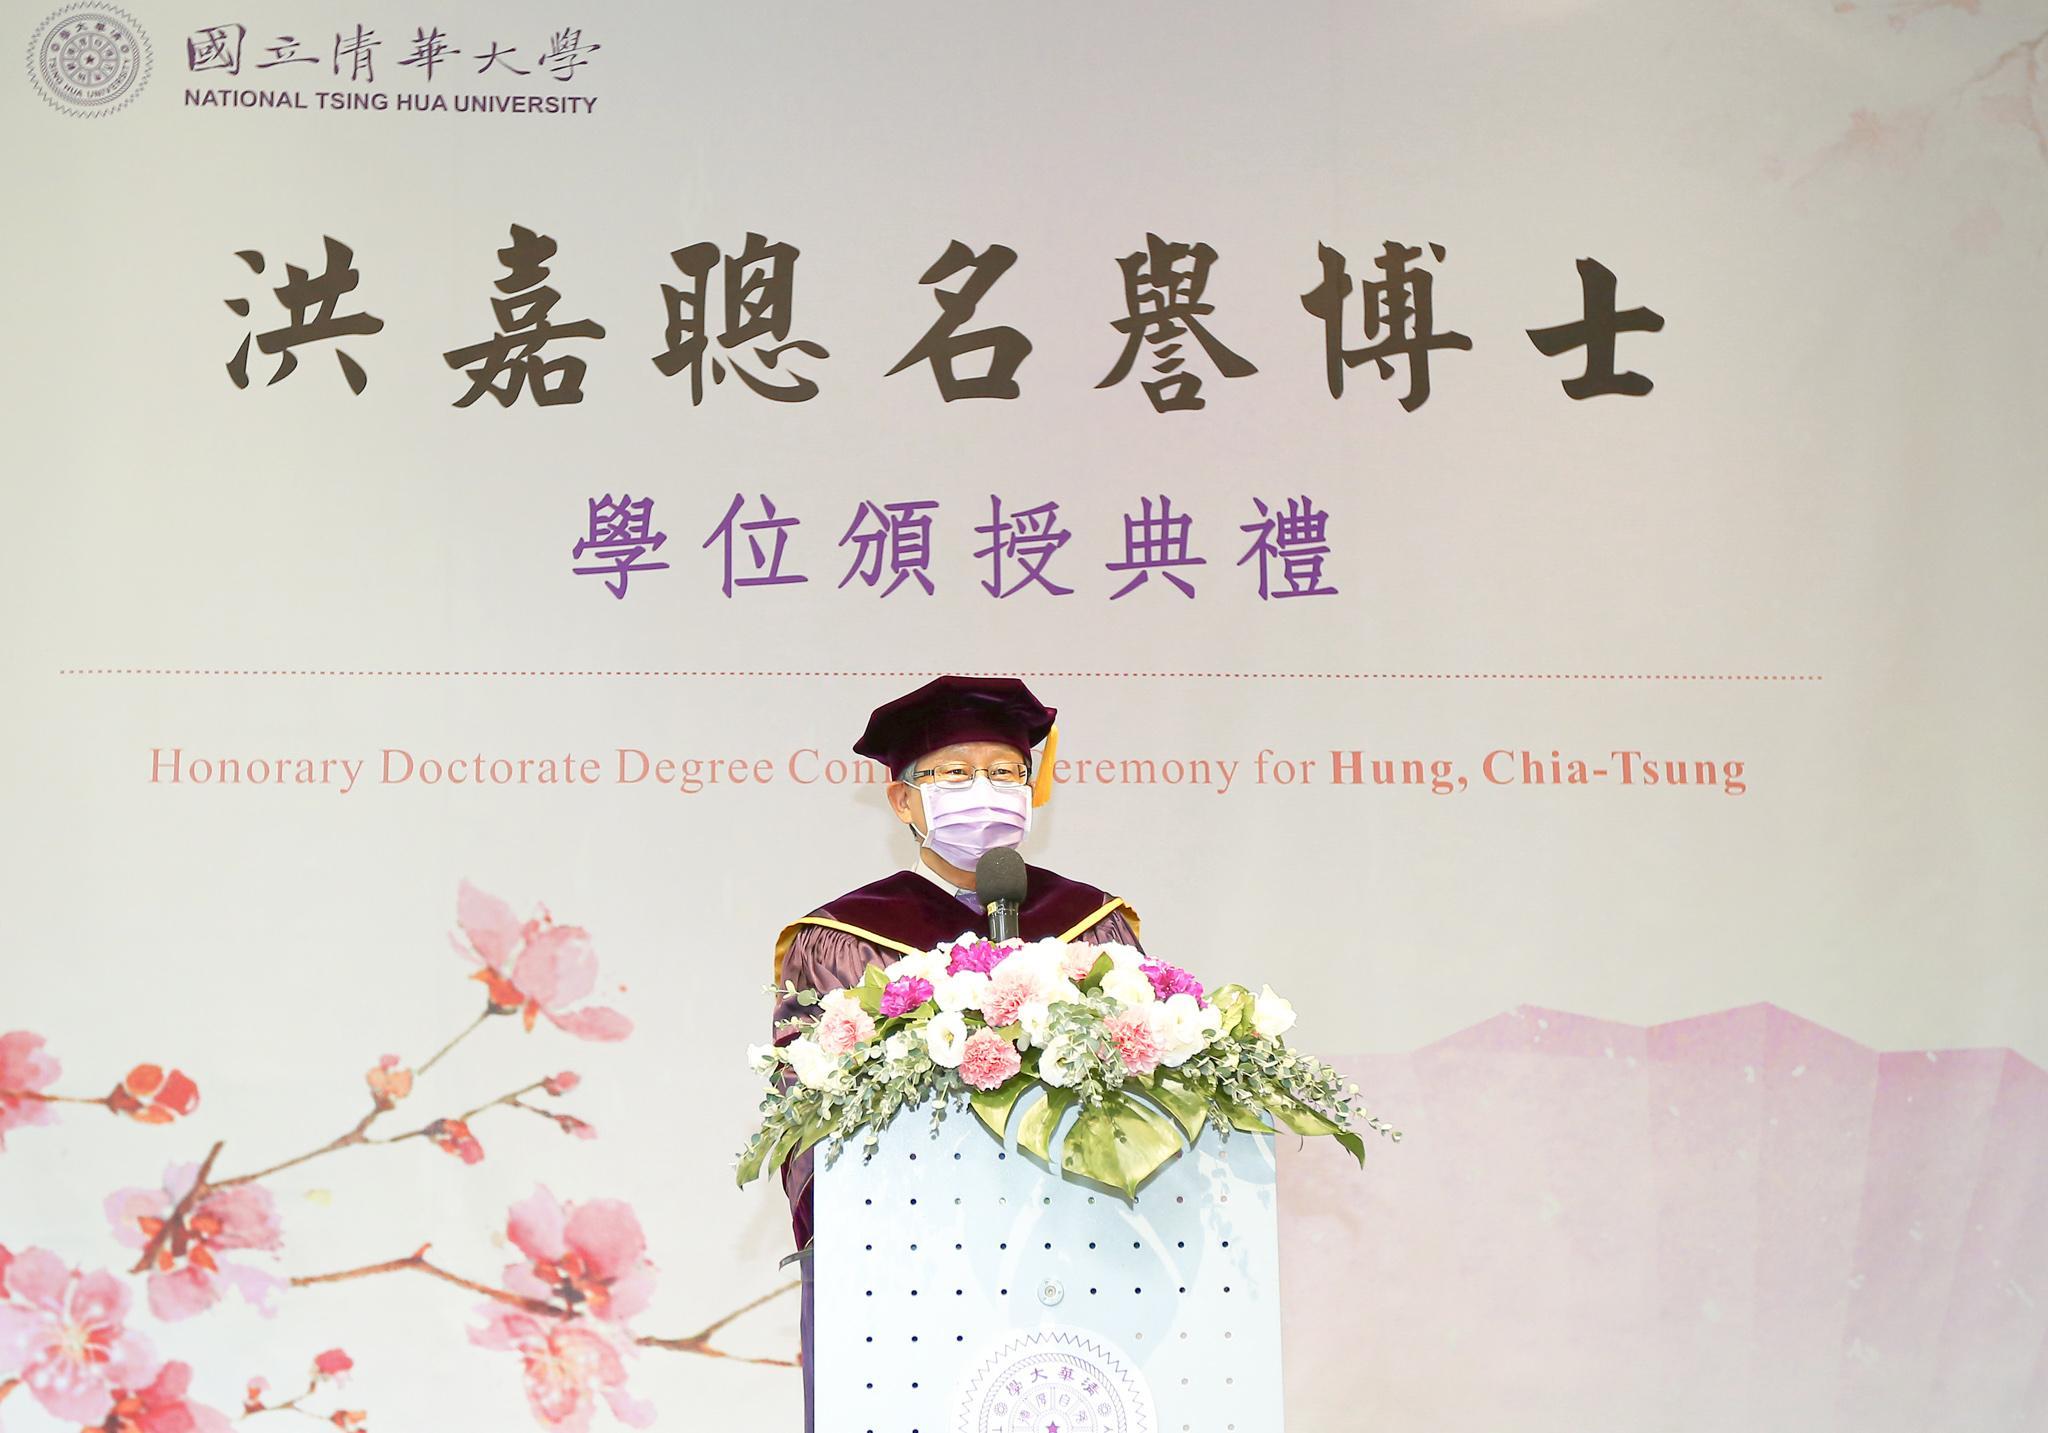 In his speech, President Hocheng said that Hung has long been “a kindred spirit of NTHU.”